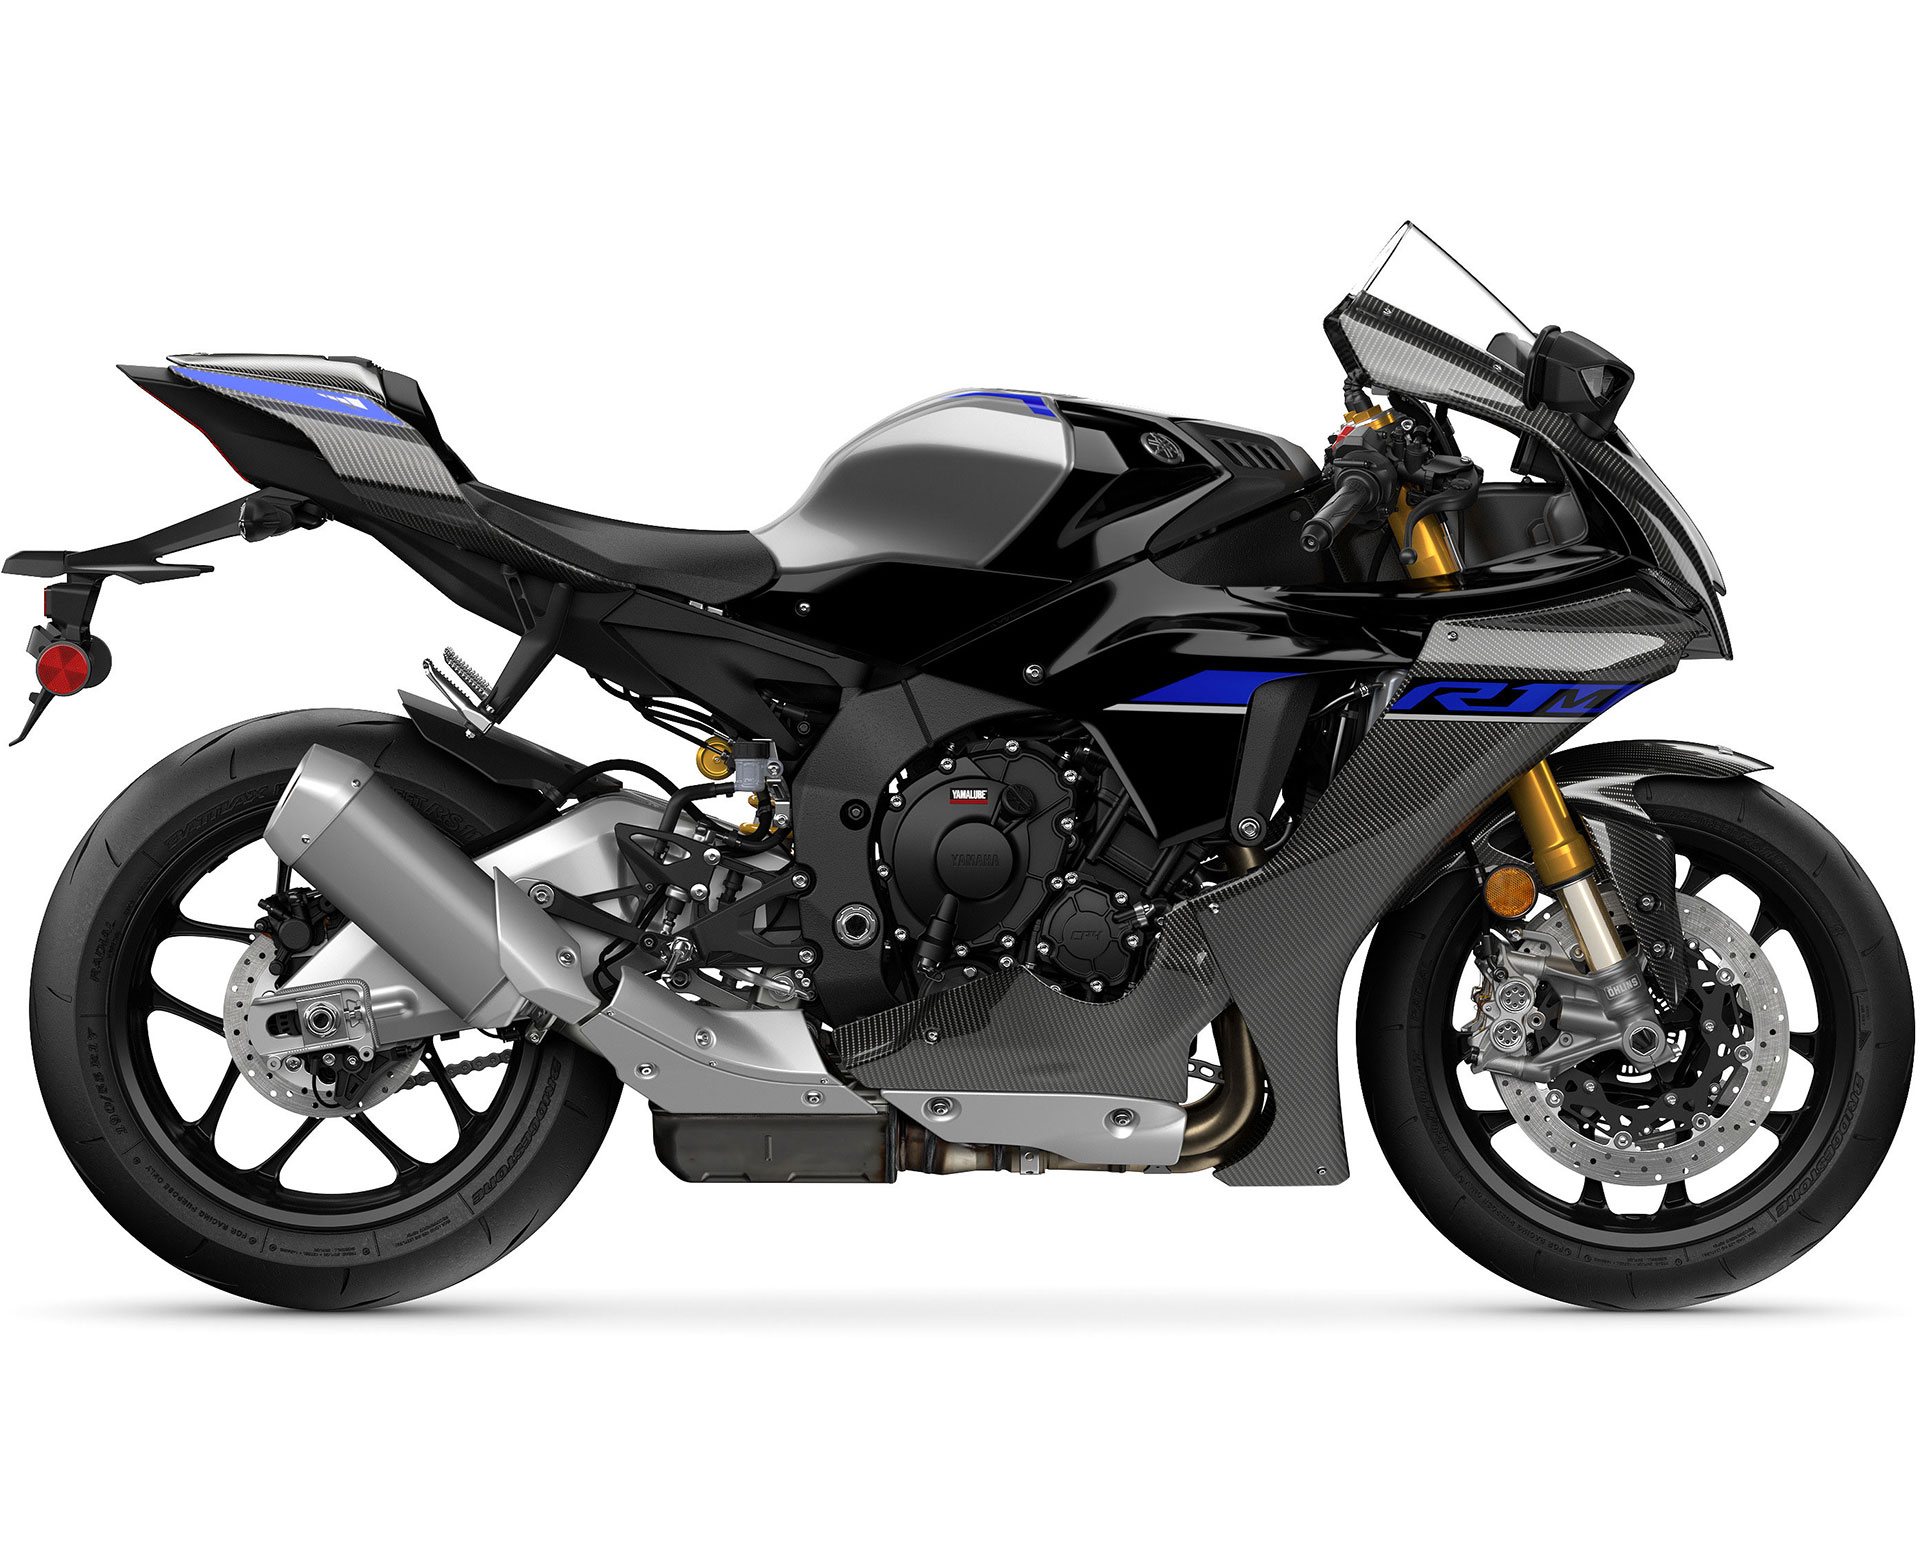 Thumbnail of your customized 2024 YZF-R1M